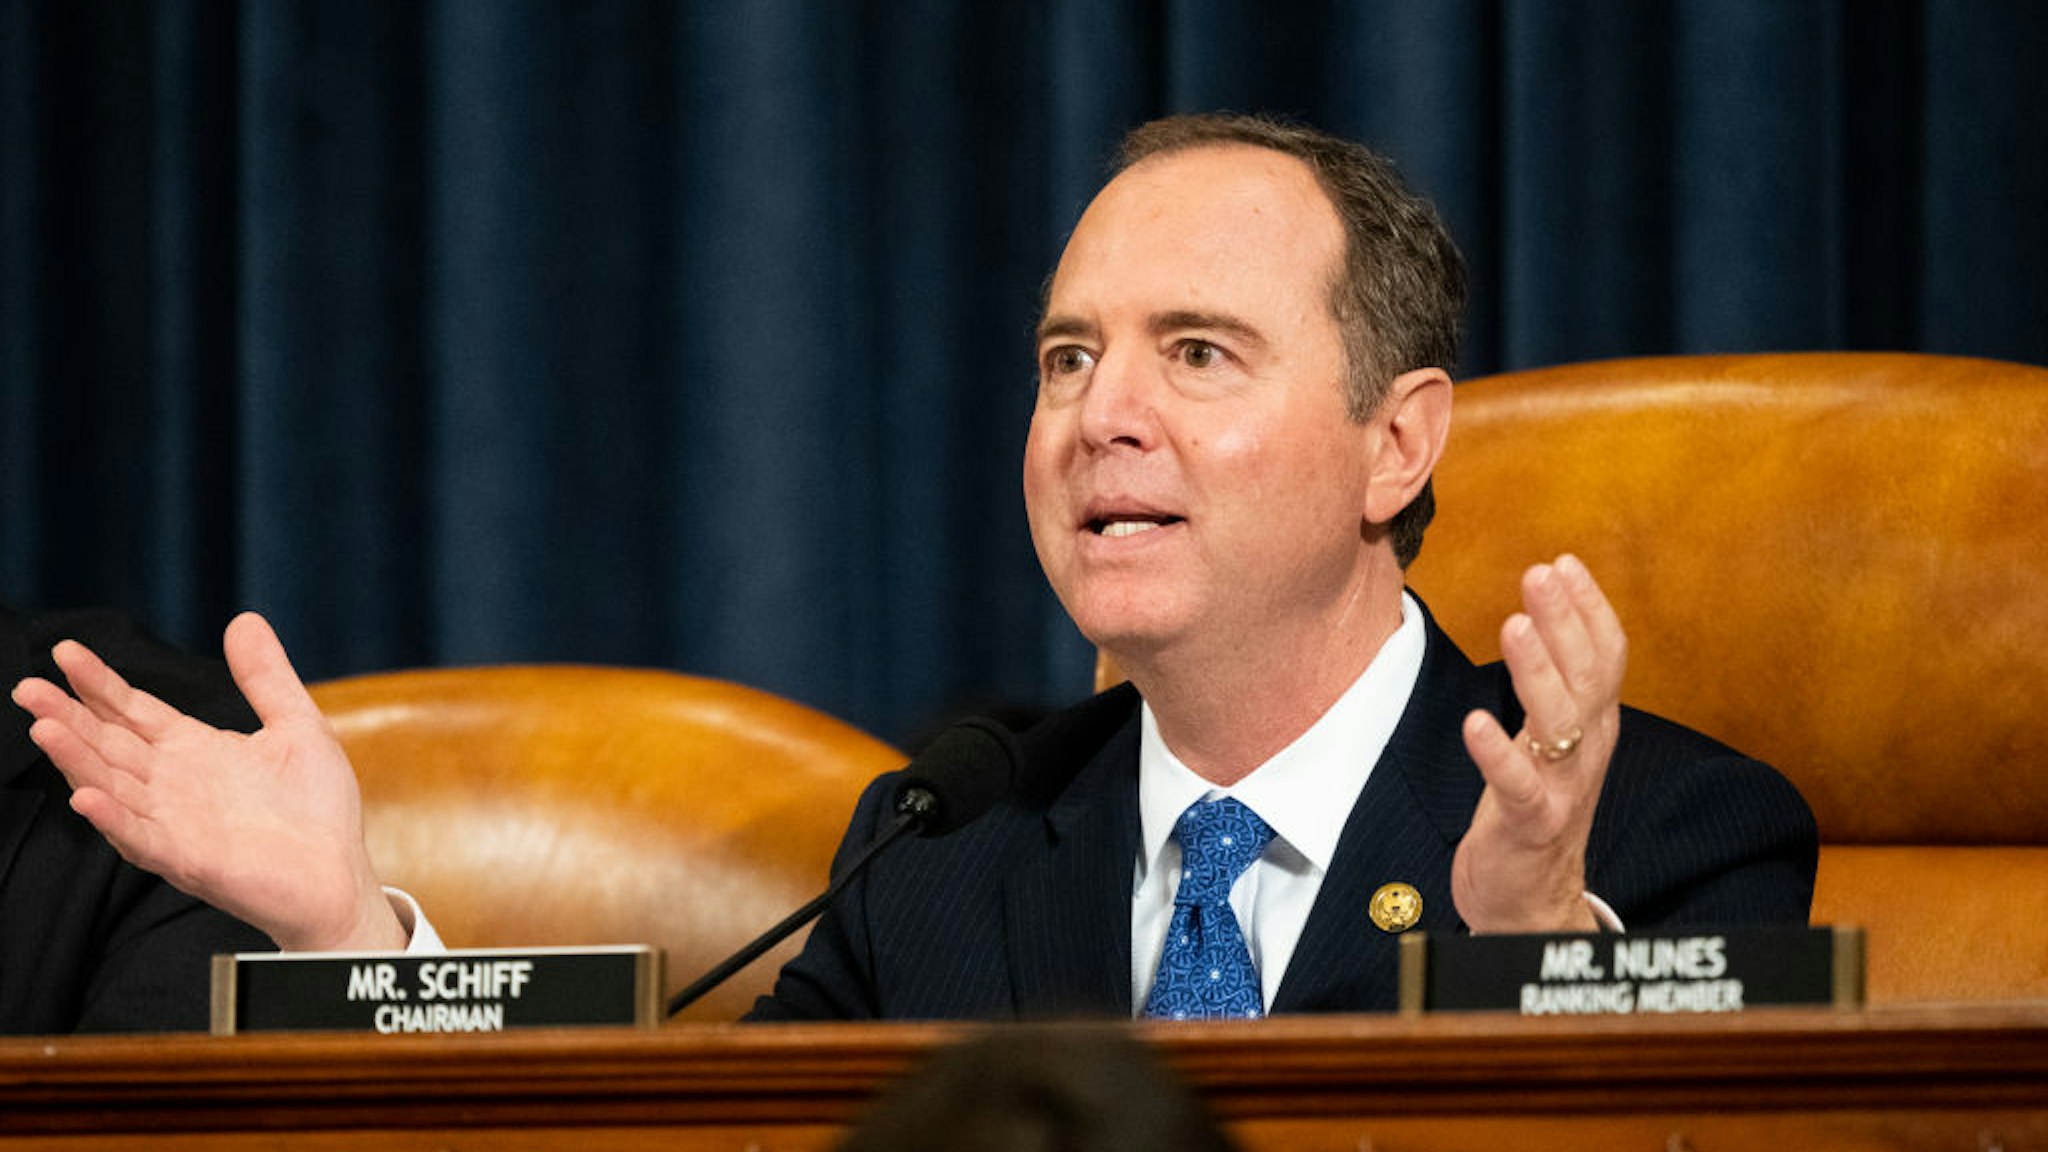 U.S. Representative Adam Schiff (D-CA) attends the Open Hearings on the Impeachment of President Donald Trump of the House Intelligence Committee in Washington.